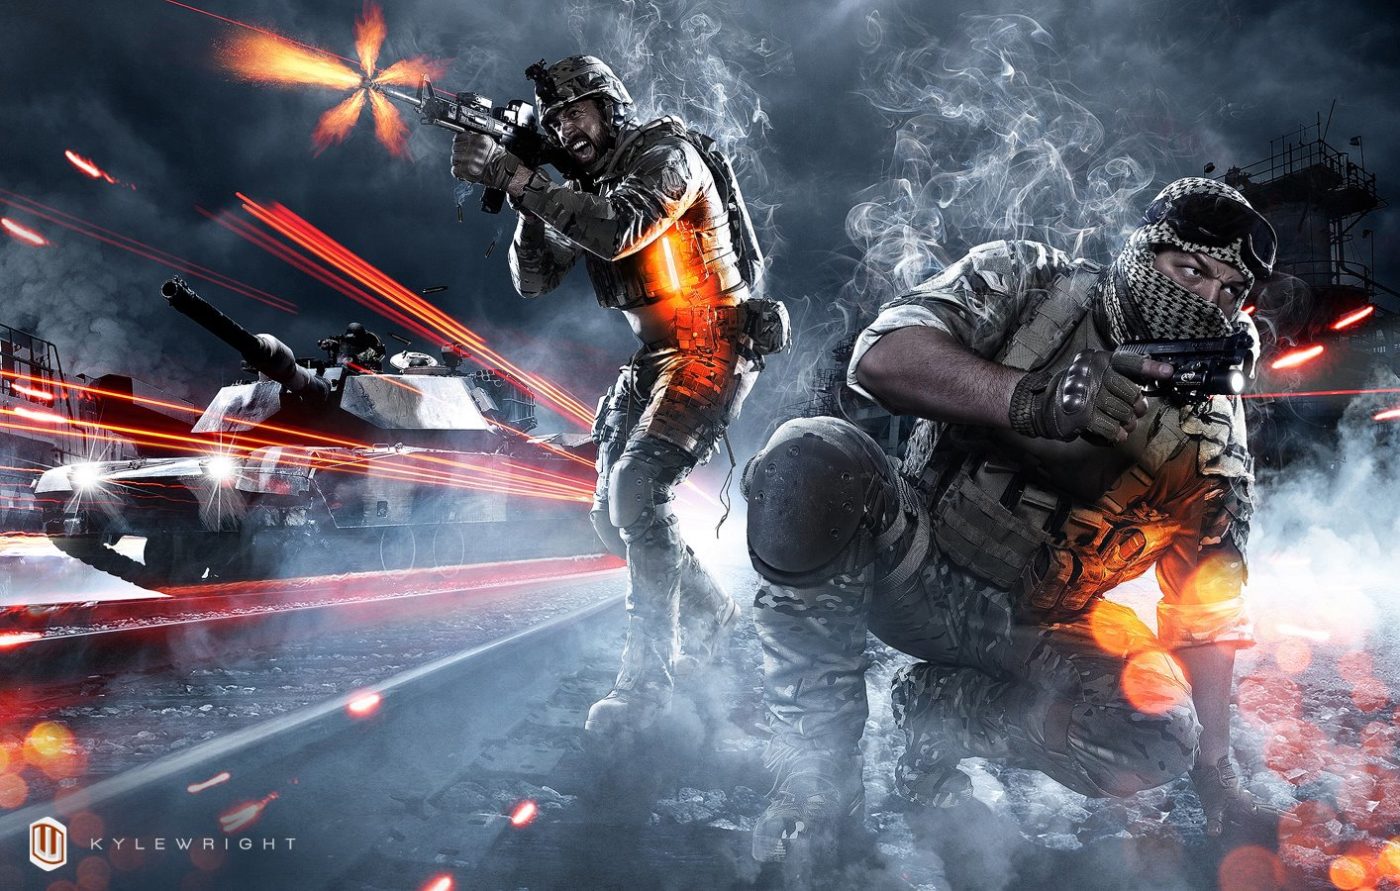 Be Advised, Jaw Dropping Battlefield 3 Artwork Spotted ... - 1414 x 900 jpeg 344kB